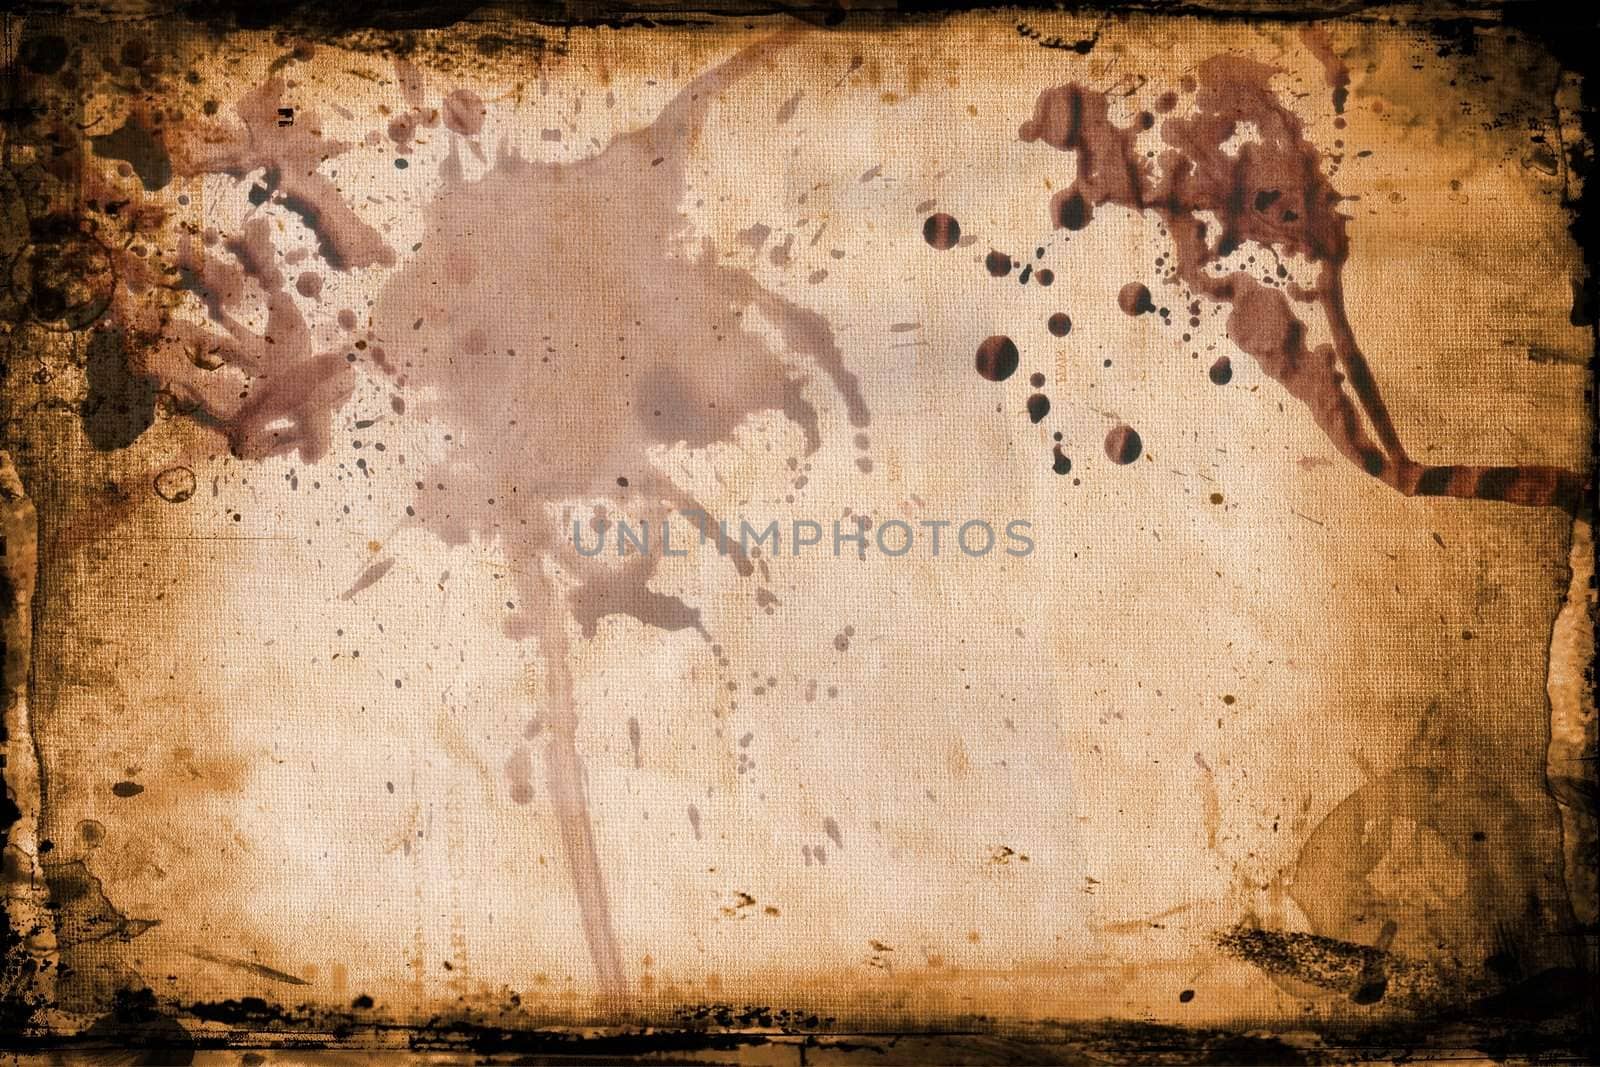 Grunge background with splats and drips